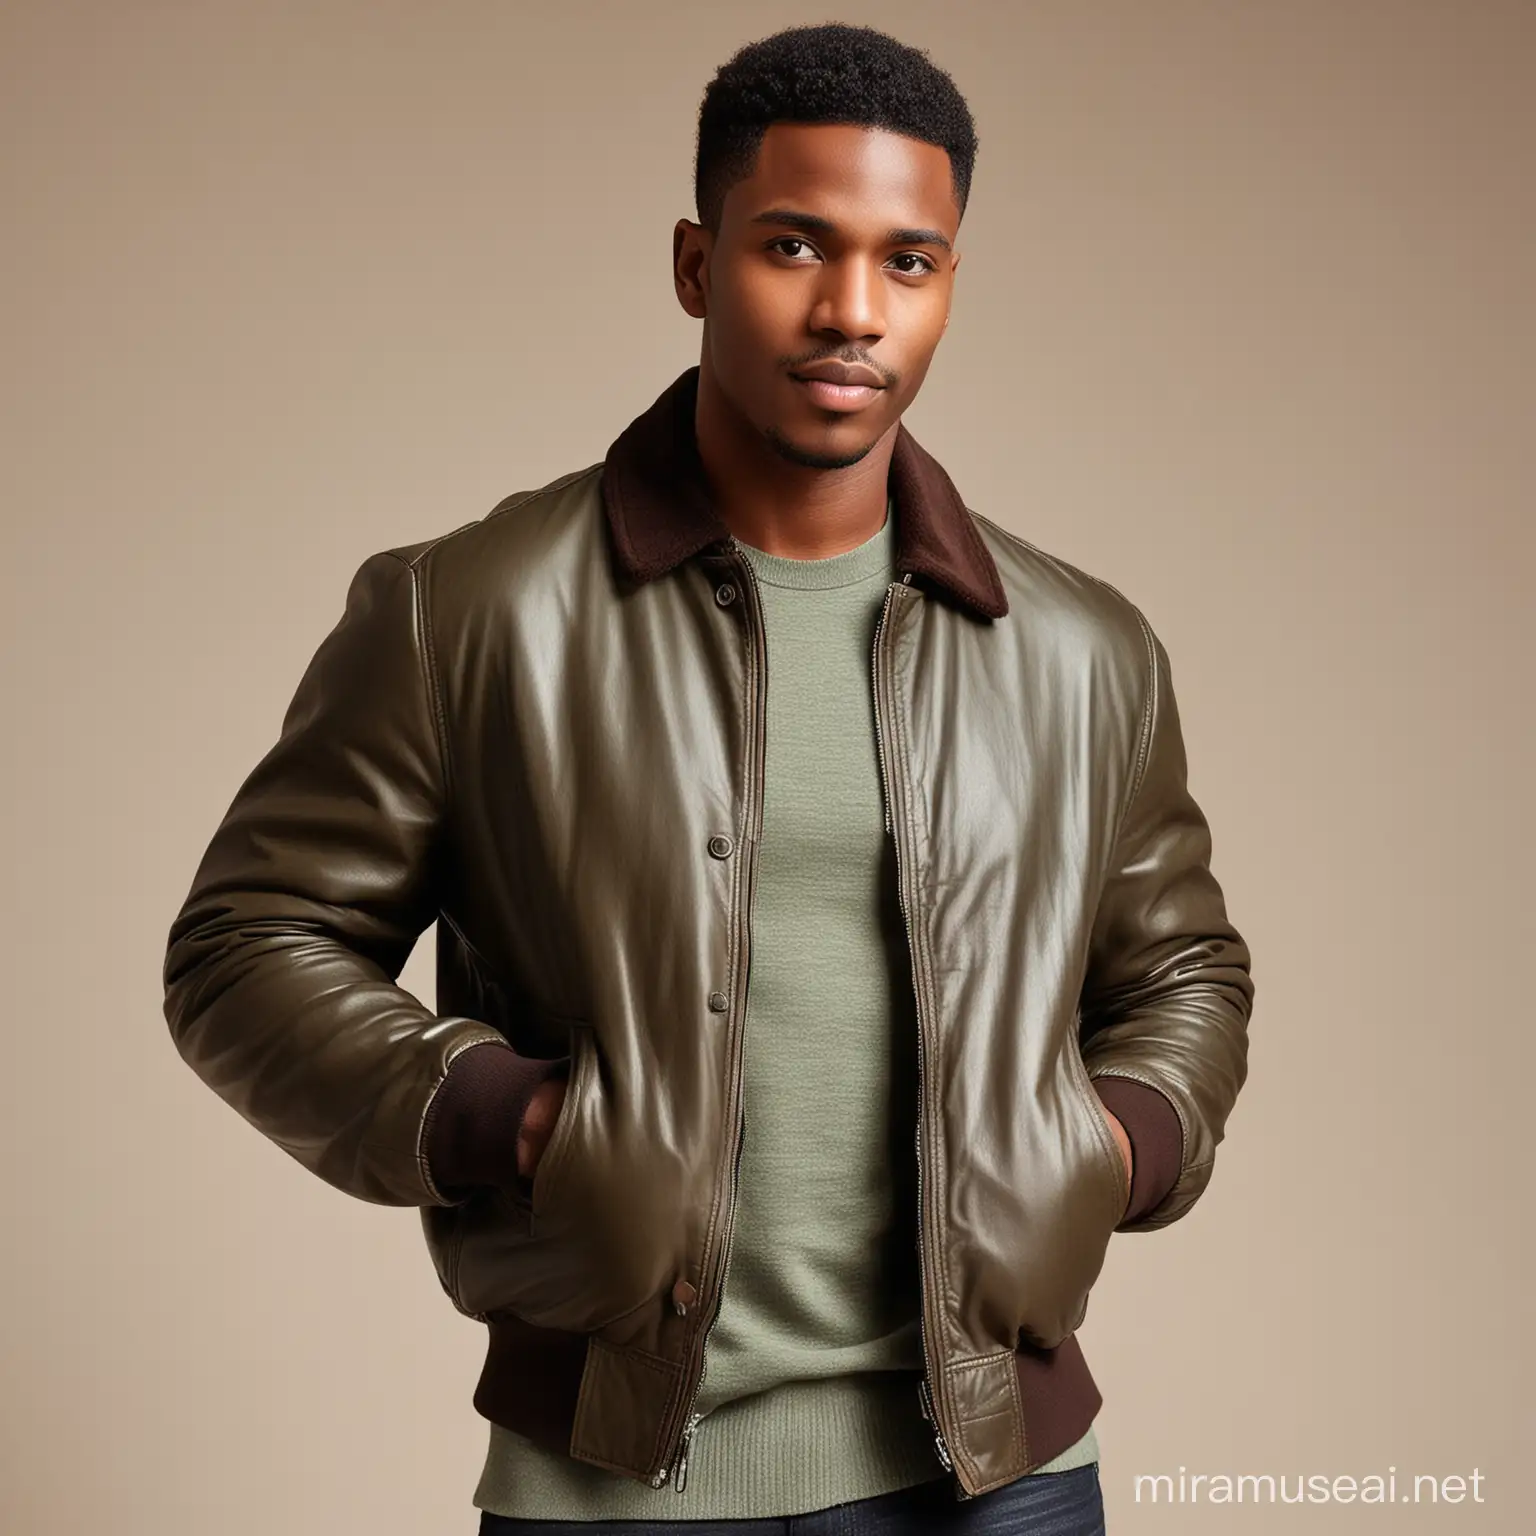 Stylish Black Man in Brown and Green Leather Bomber Jacket